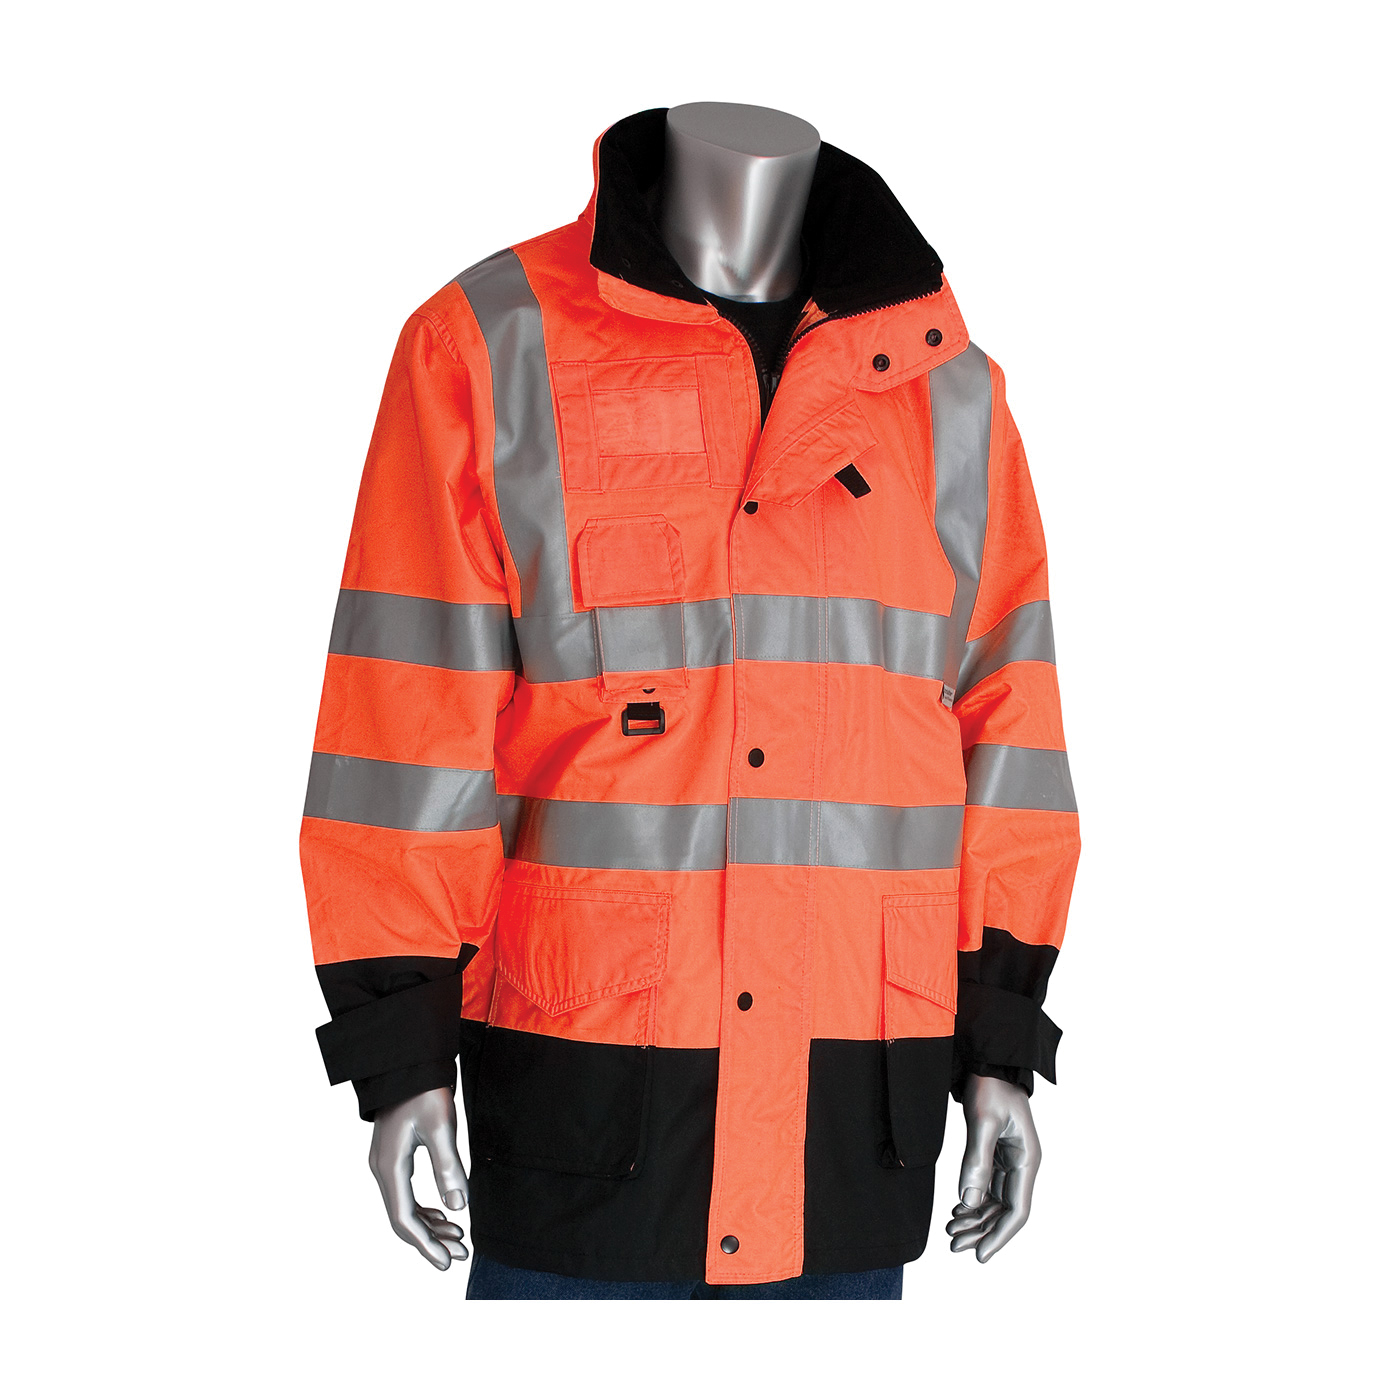 PIP® 343-1756-OR/2X 7-in-1 All Condition Winter Coat With Inner Jacket and Vest Combination, Hi-Viz Orange, Polyester, 61.4 in Chest, Resists: Water, Specifications Met: ANSI 107 Class 3 Type R